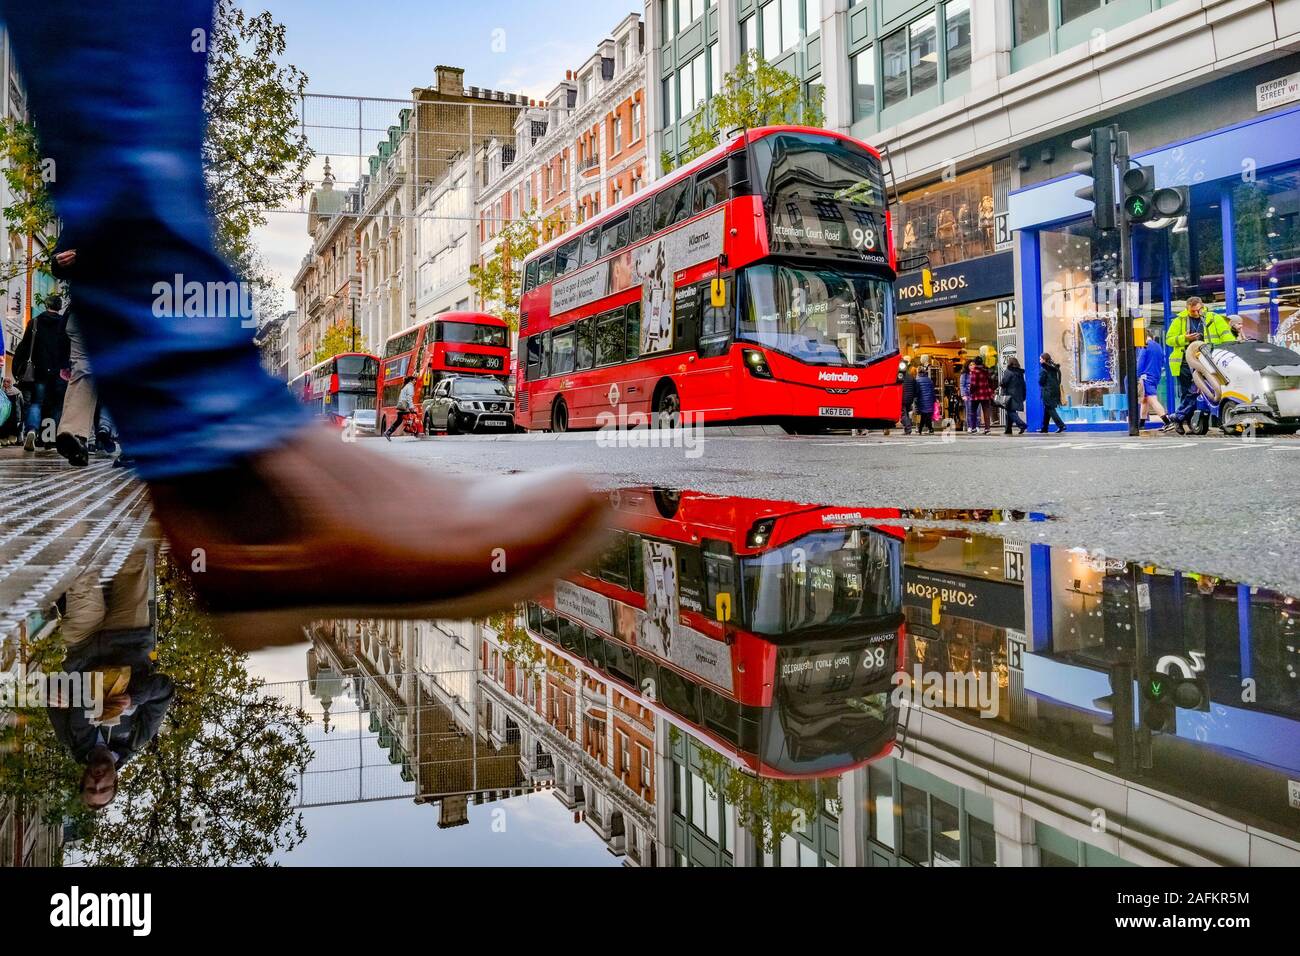 London, UK. Red double decker buses, Oxford Street, London, England, Stock Photo